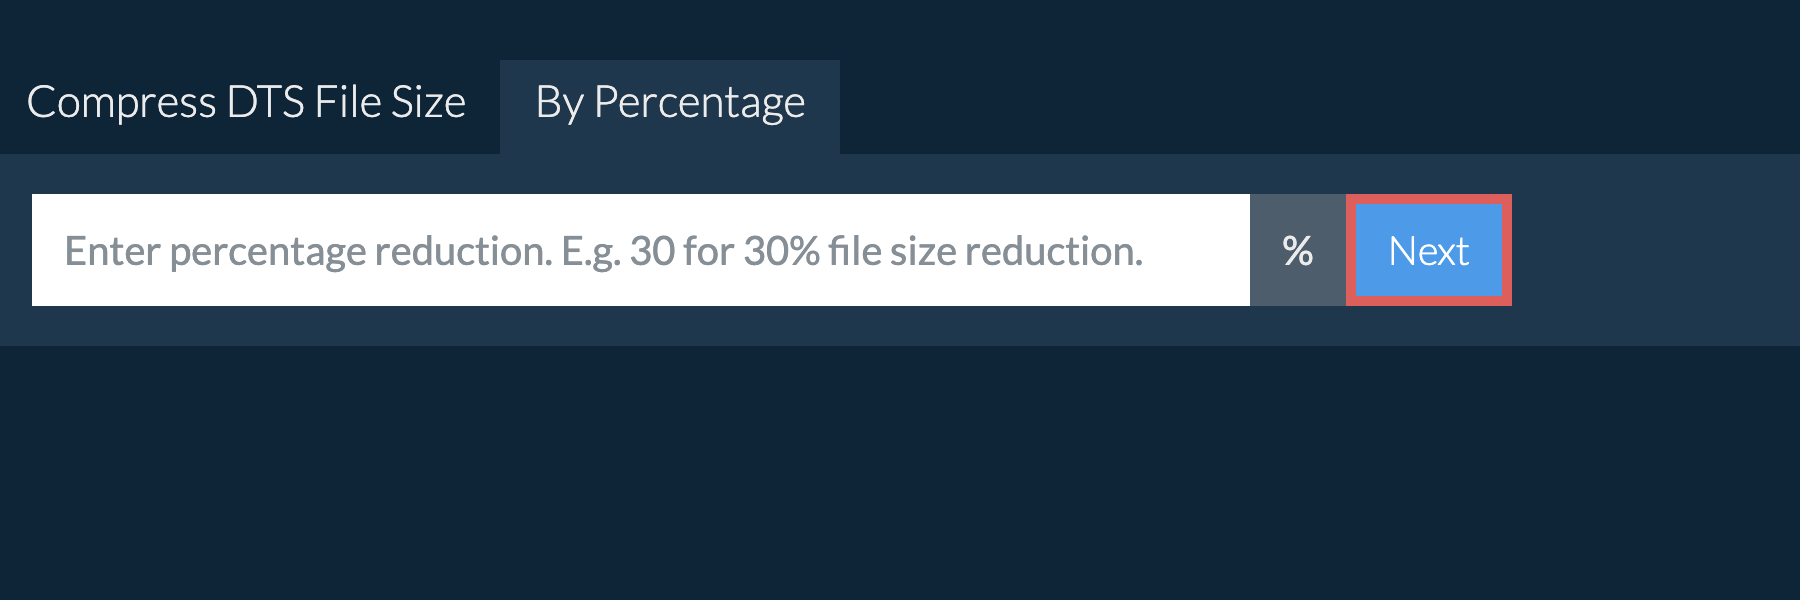 Reduce dts By Percentage